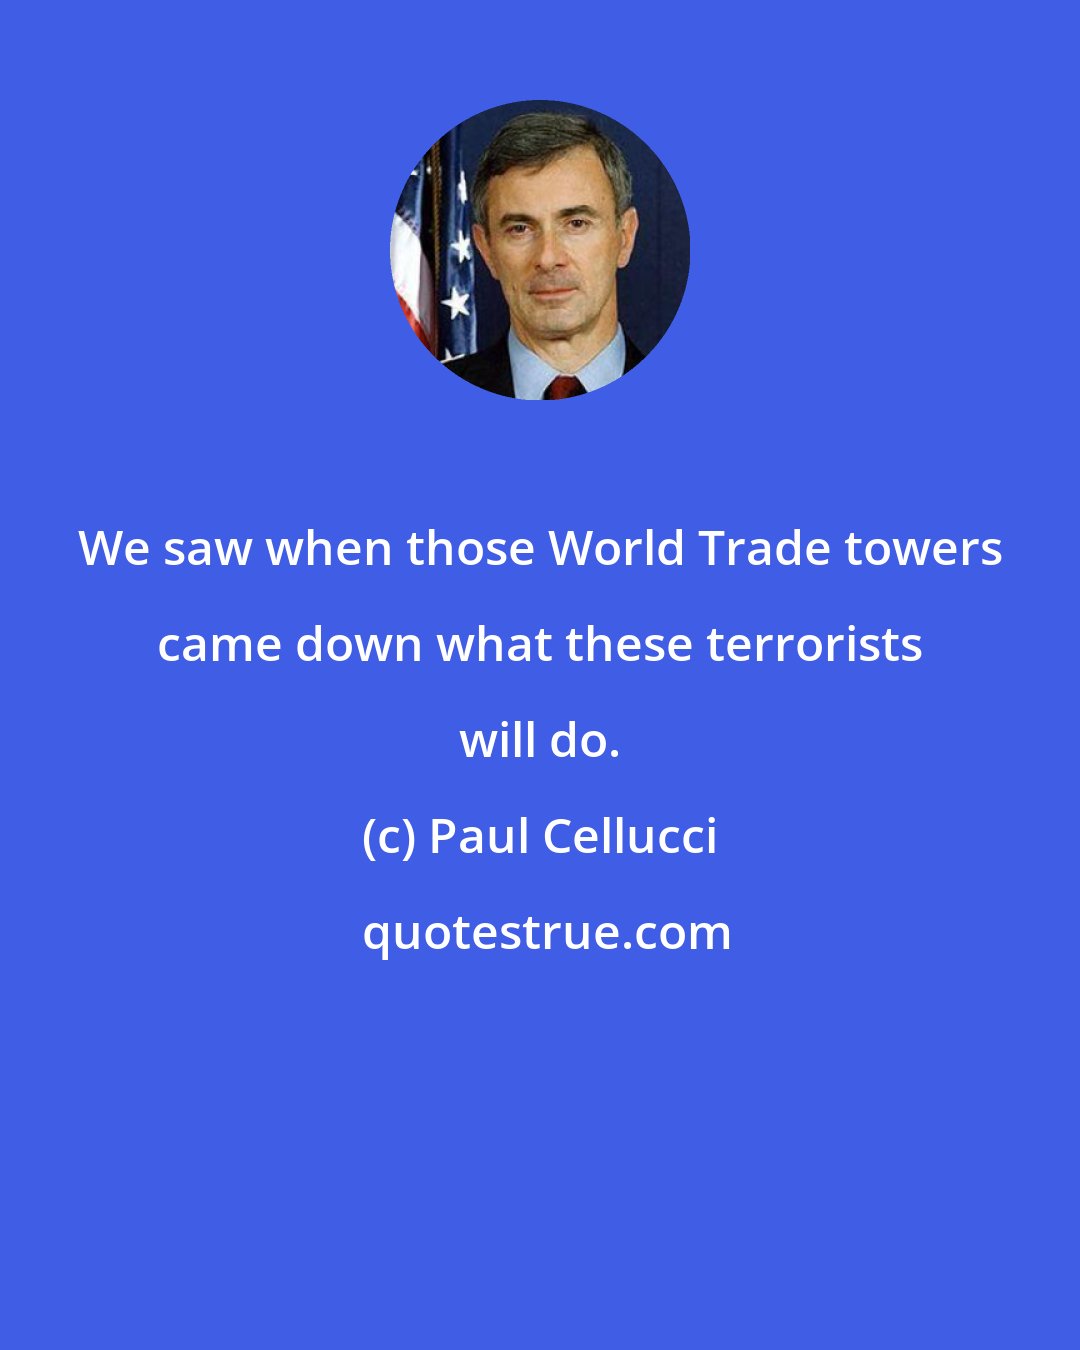 Paul Cellucci: We saw when those World Trade towers came down what these terrorists will do.